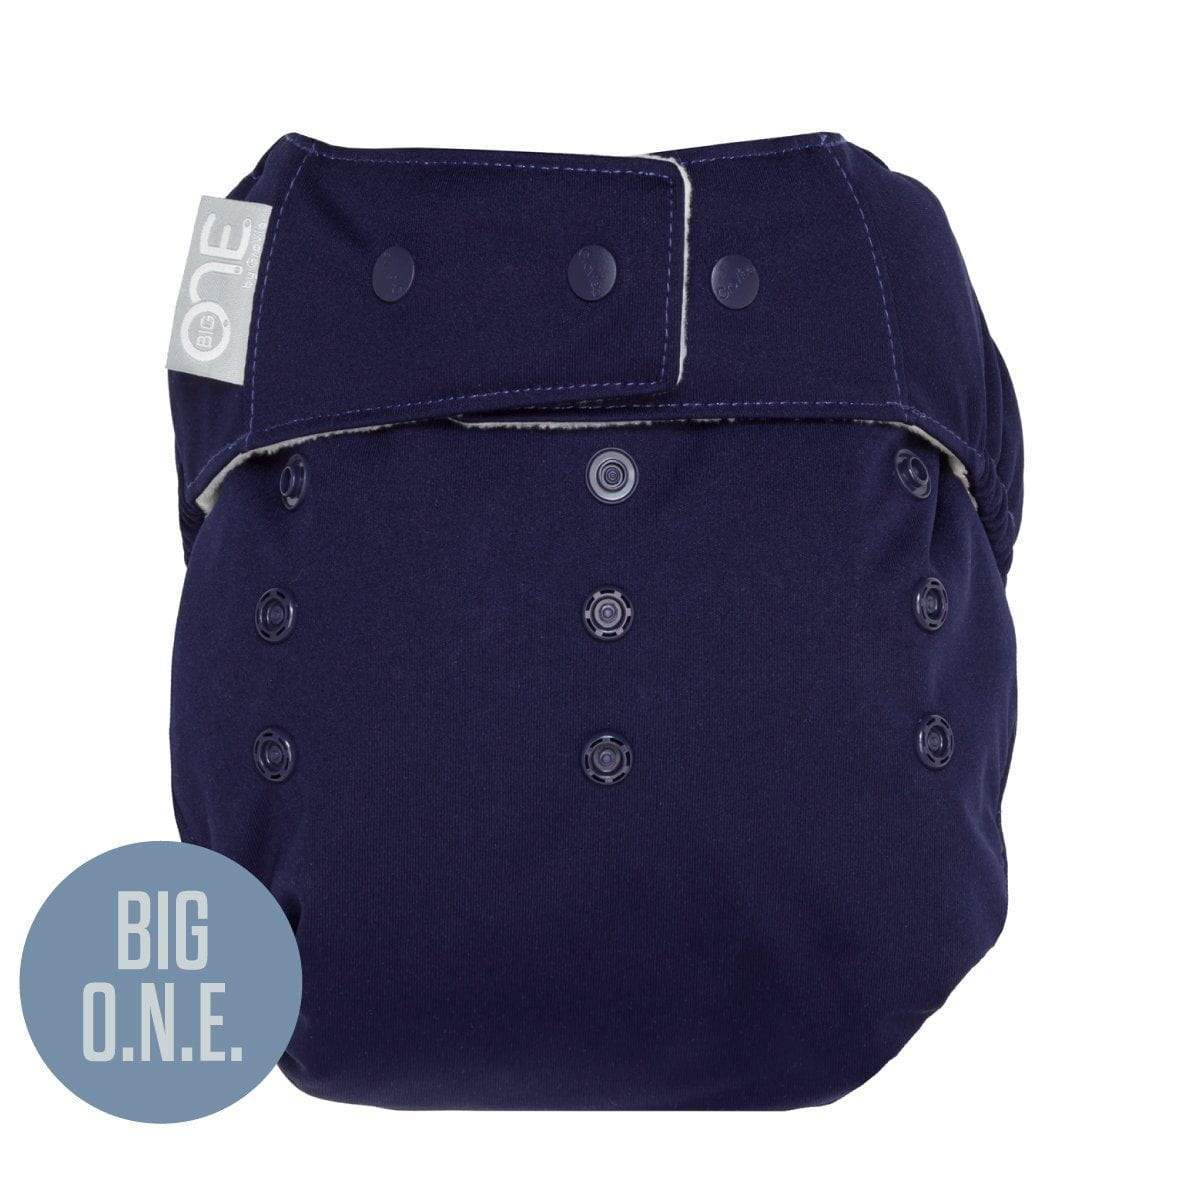 Cloth Diapers For Toddlers - Dark Navy Blue Cloth Diaper